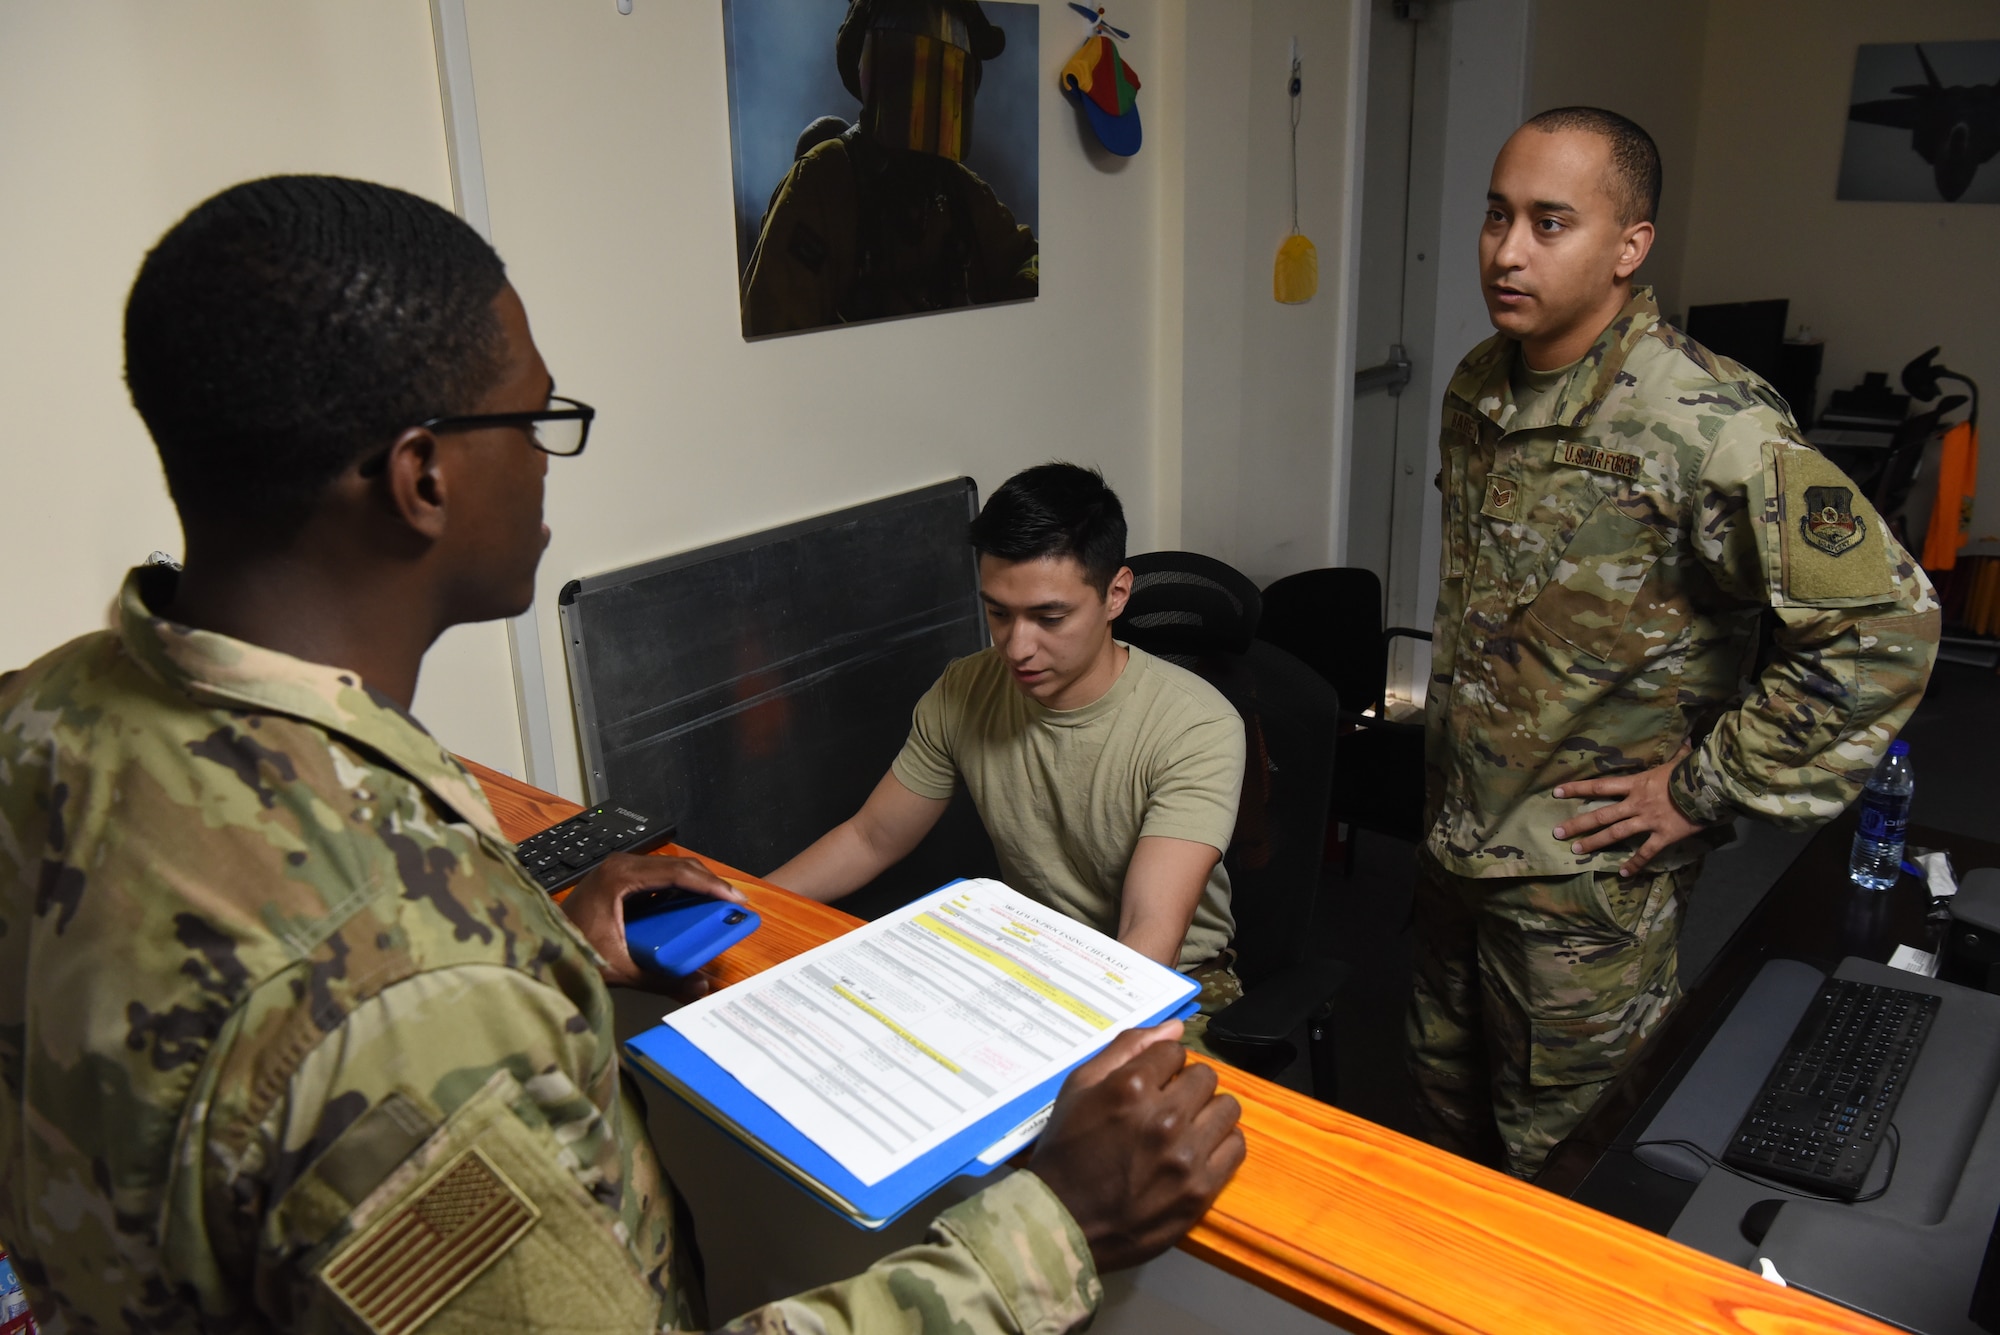 Senior Airman David Gonzalez (center) and Staff Sgt. Alberto Barreto (right), both 380th Air Expeditionary Wing  finance customer service representatives, assist an Airman with in-processing June 6, 2019, at Al Dhafra Air Base, United Arab Emirates.